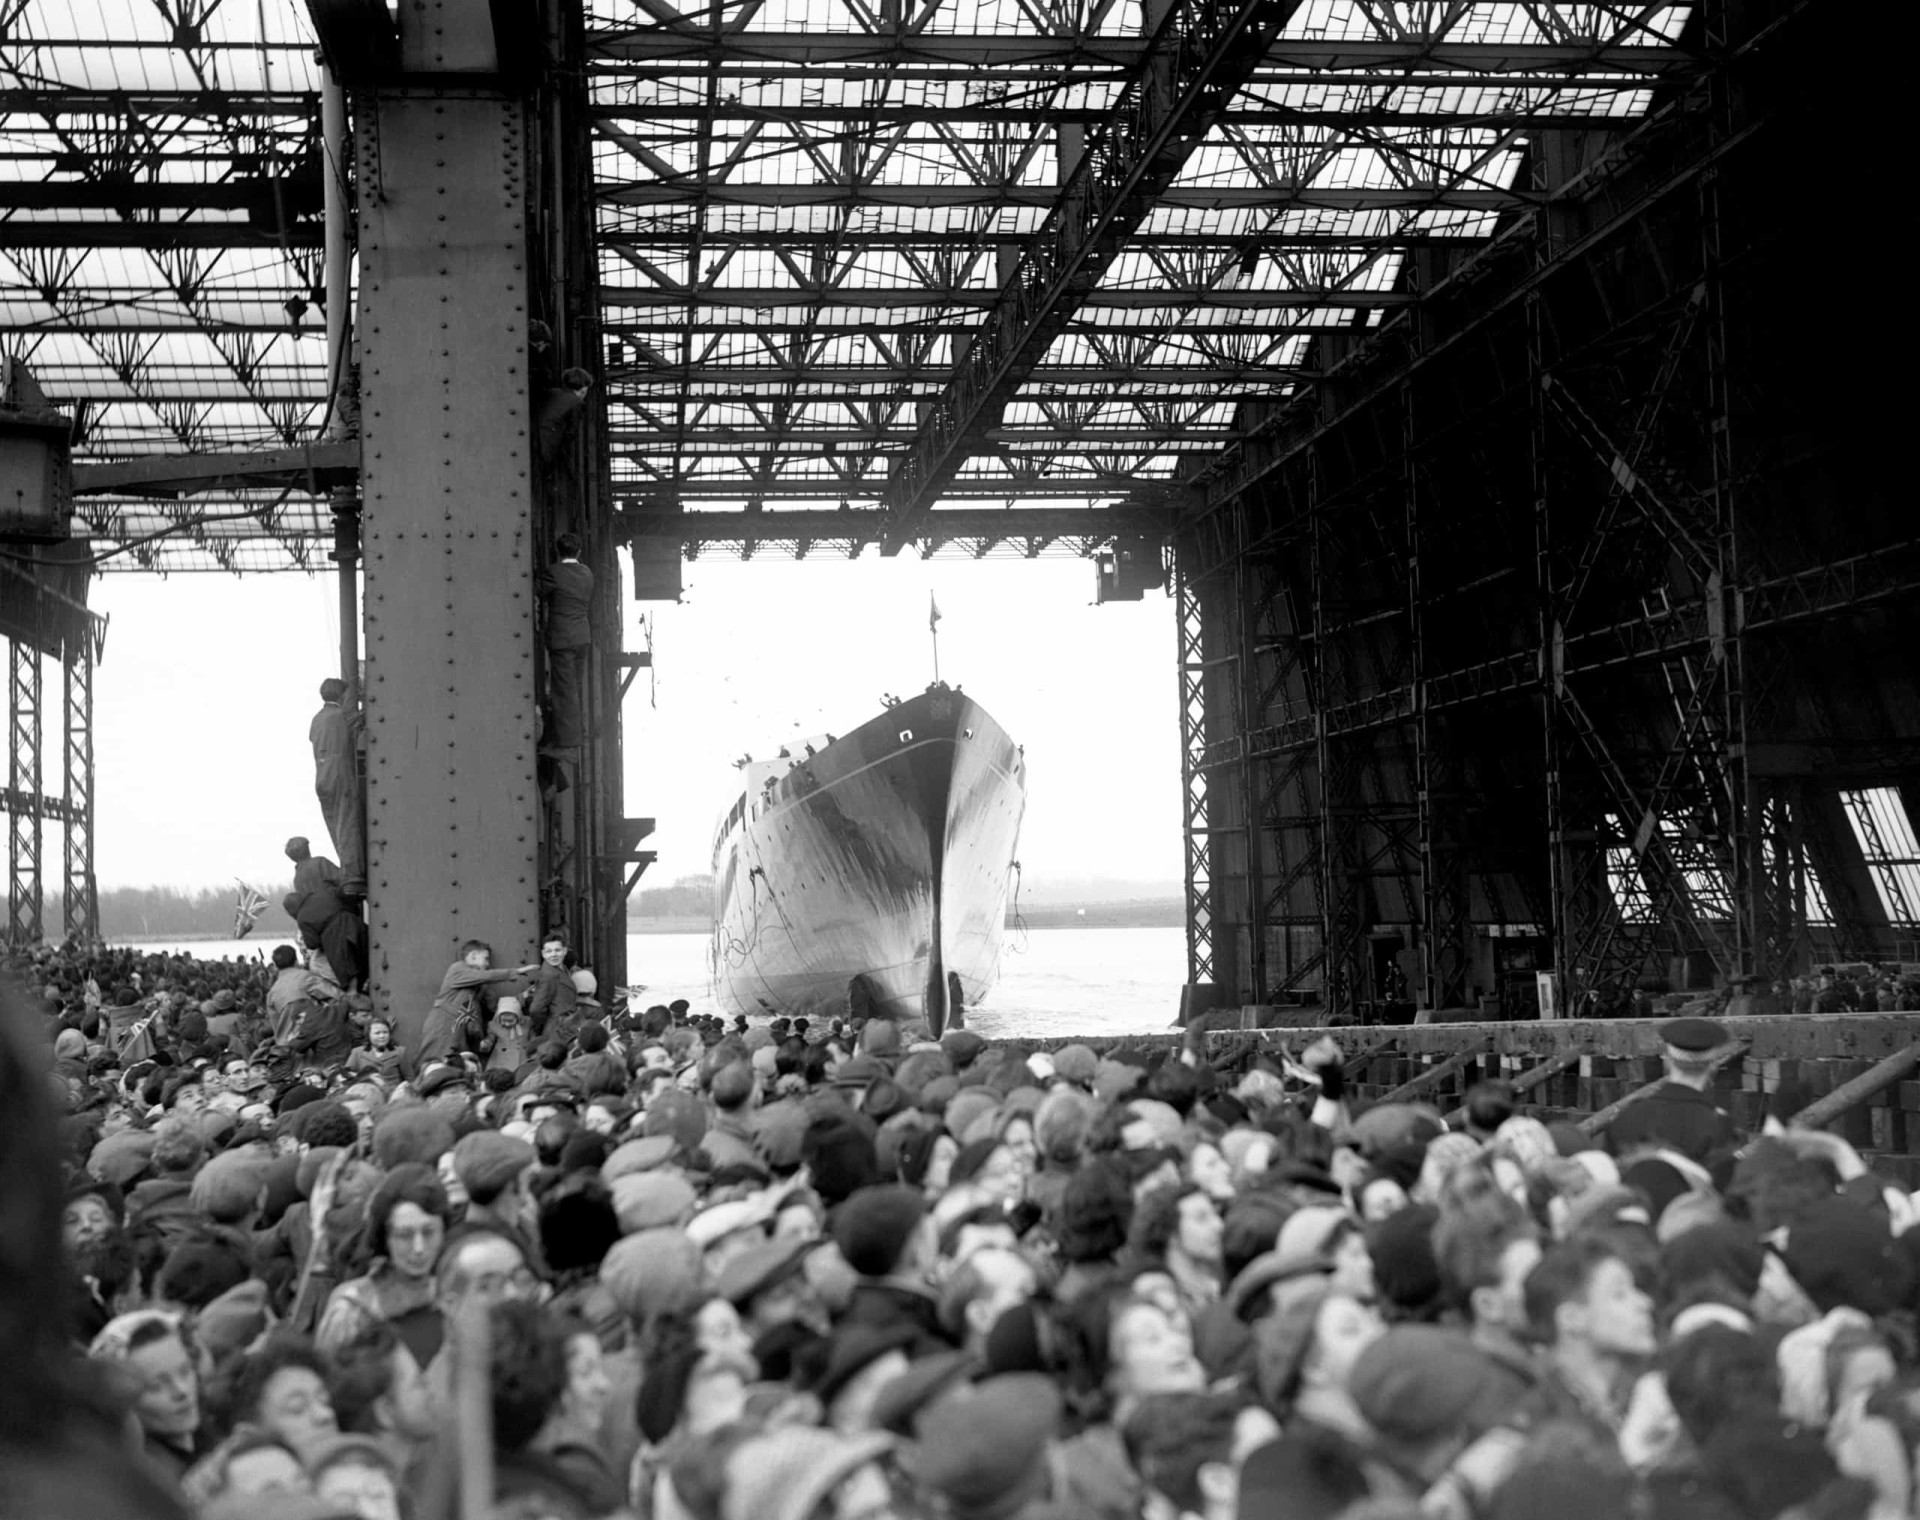 <p>The new Royal Yacht <em>Britannia</em> enters the water after her launch on April 16, 1953 by Queen Elizabeth II at John Brown's shipyard on Clydebank, Scotland. The 126-m (413-ft) <em>Britannia</em> was designed with three masts and could reach a seagoing cruising speed of 21 knots.</p><p>You may also like:<a href="https://www.starsinsider.com/n/179932?utm_source=msn.com&utm_medium=display&utm_campaign=referral_description&utm_content=474709v3en-ph"> Do you recognize these big TV stars from 10 years ago?</a></p>